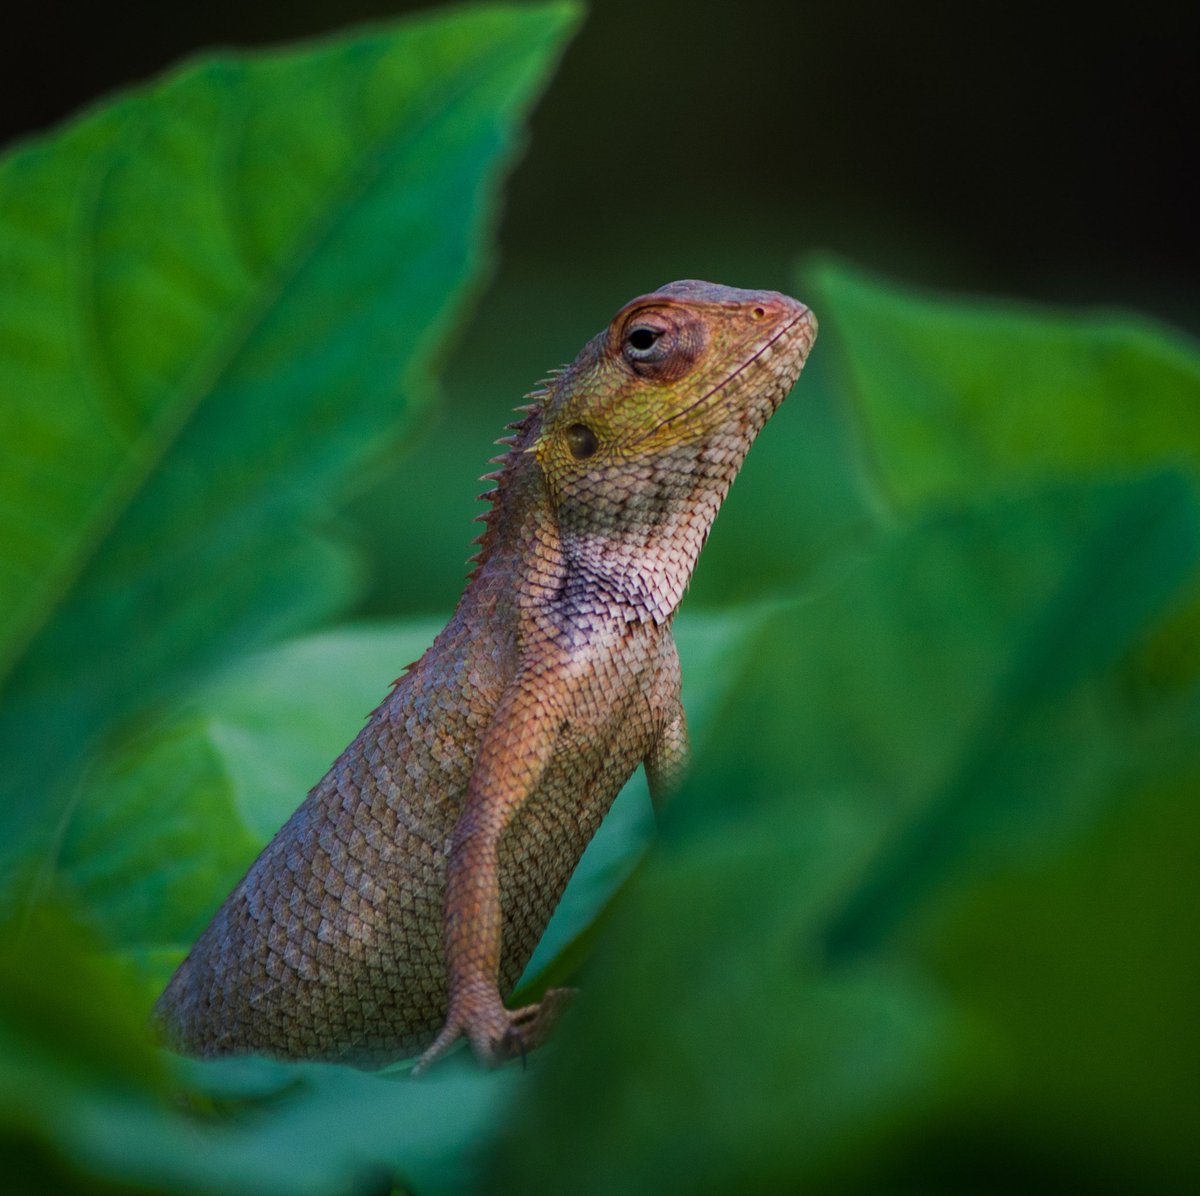 Getting obsessed with this #gardenlizard. Look at his/her beauty. 
#nikonphotography #garden #plants #colorful #ThePhotoHour #ThePhotoMode #BBCWildlifePOTD #potd #stormhour @indiaves @the_wildindia @NatGeoPhotos @NikonIndia